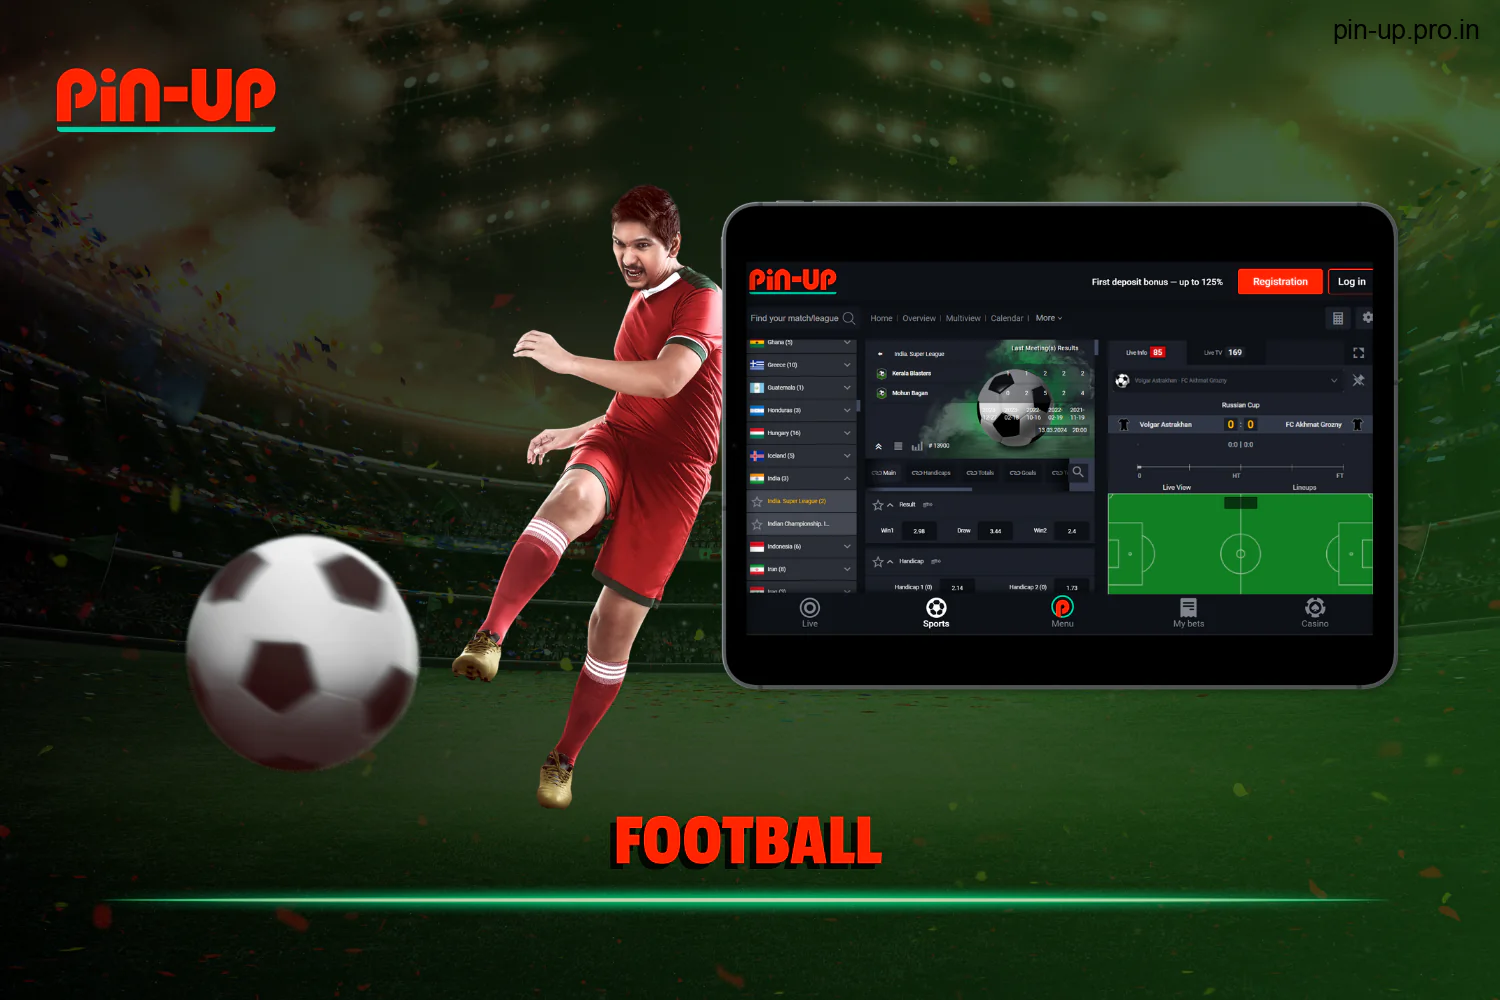 Indian users of PinUp can participate in betting on football matches.